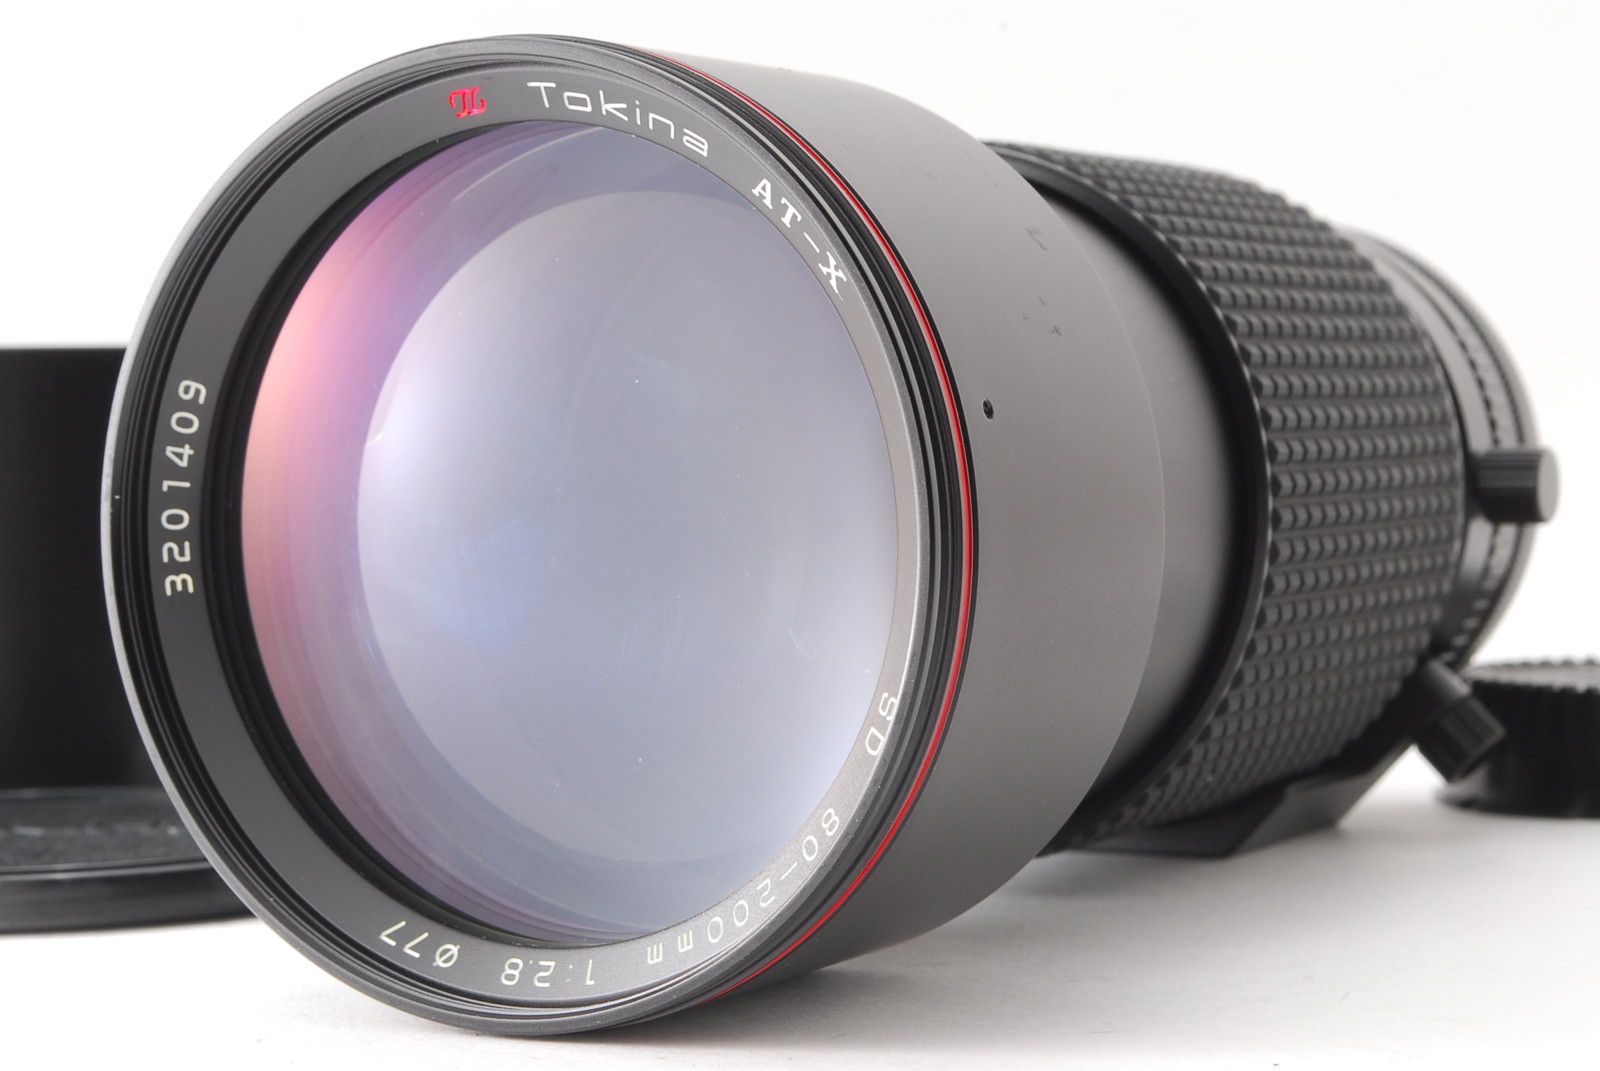 PROMOTION. EXC++++ Tokina AT-X SD 80-200mm f/2.8 for Canon FD, Hood, Front Cap, Rear Cap from Japan